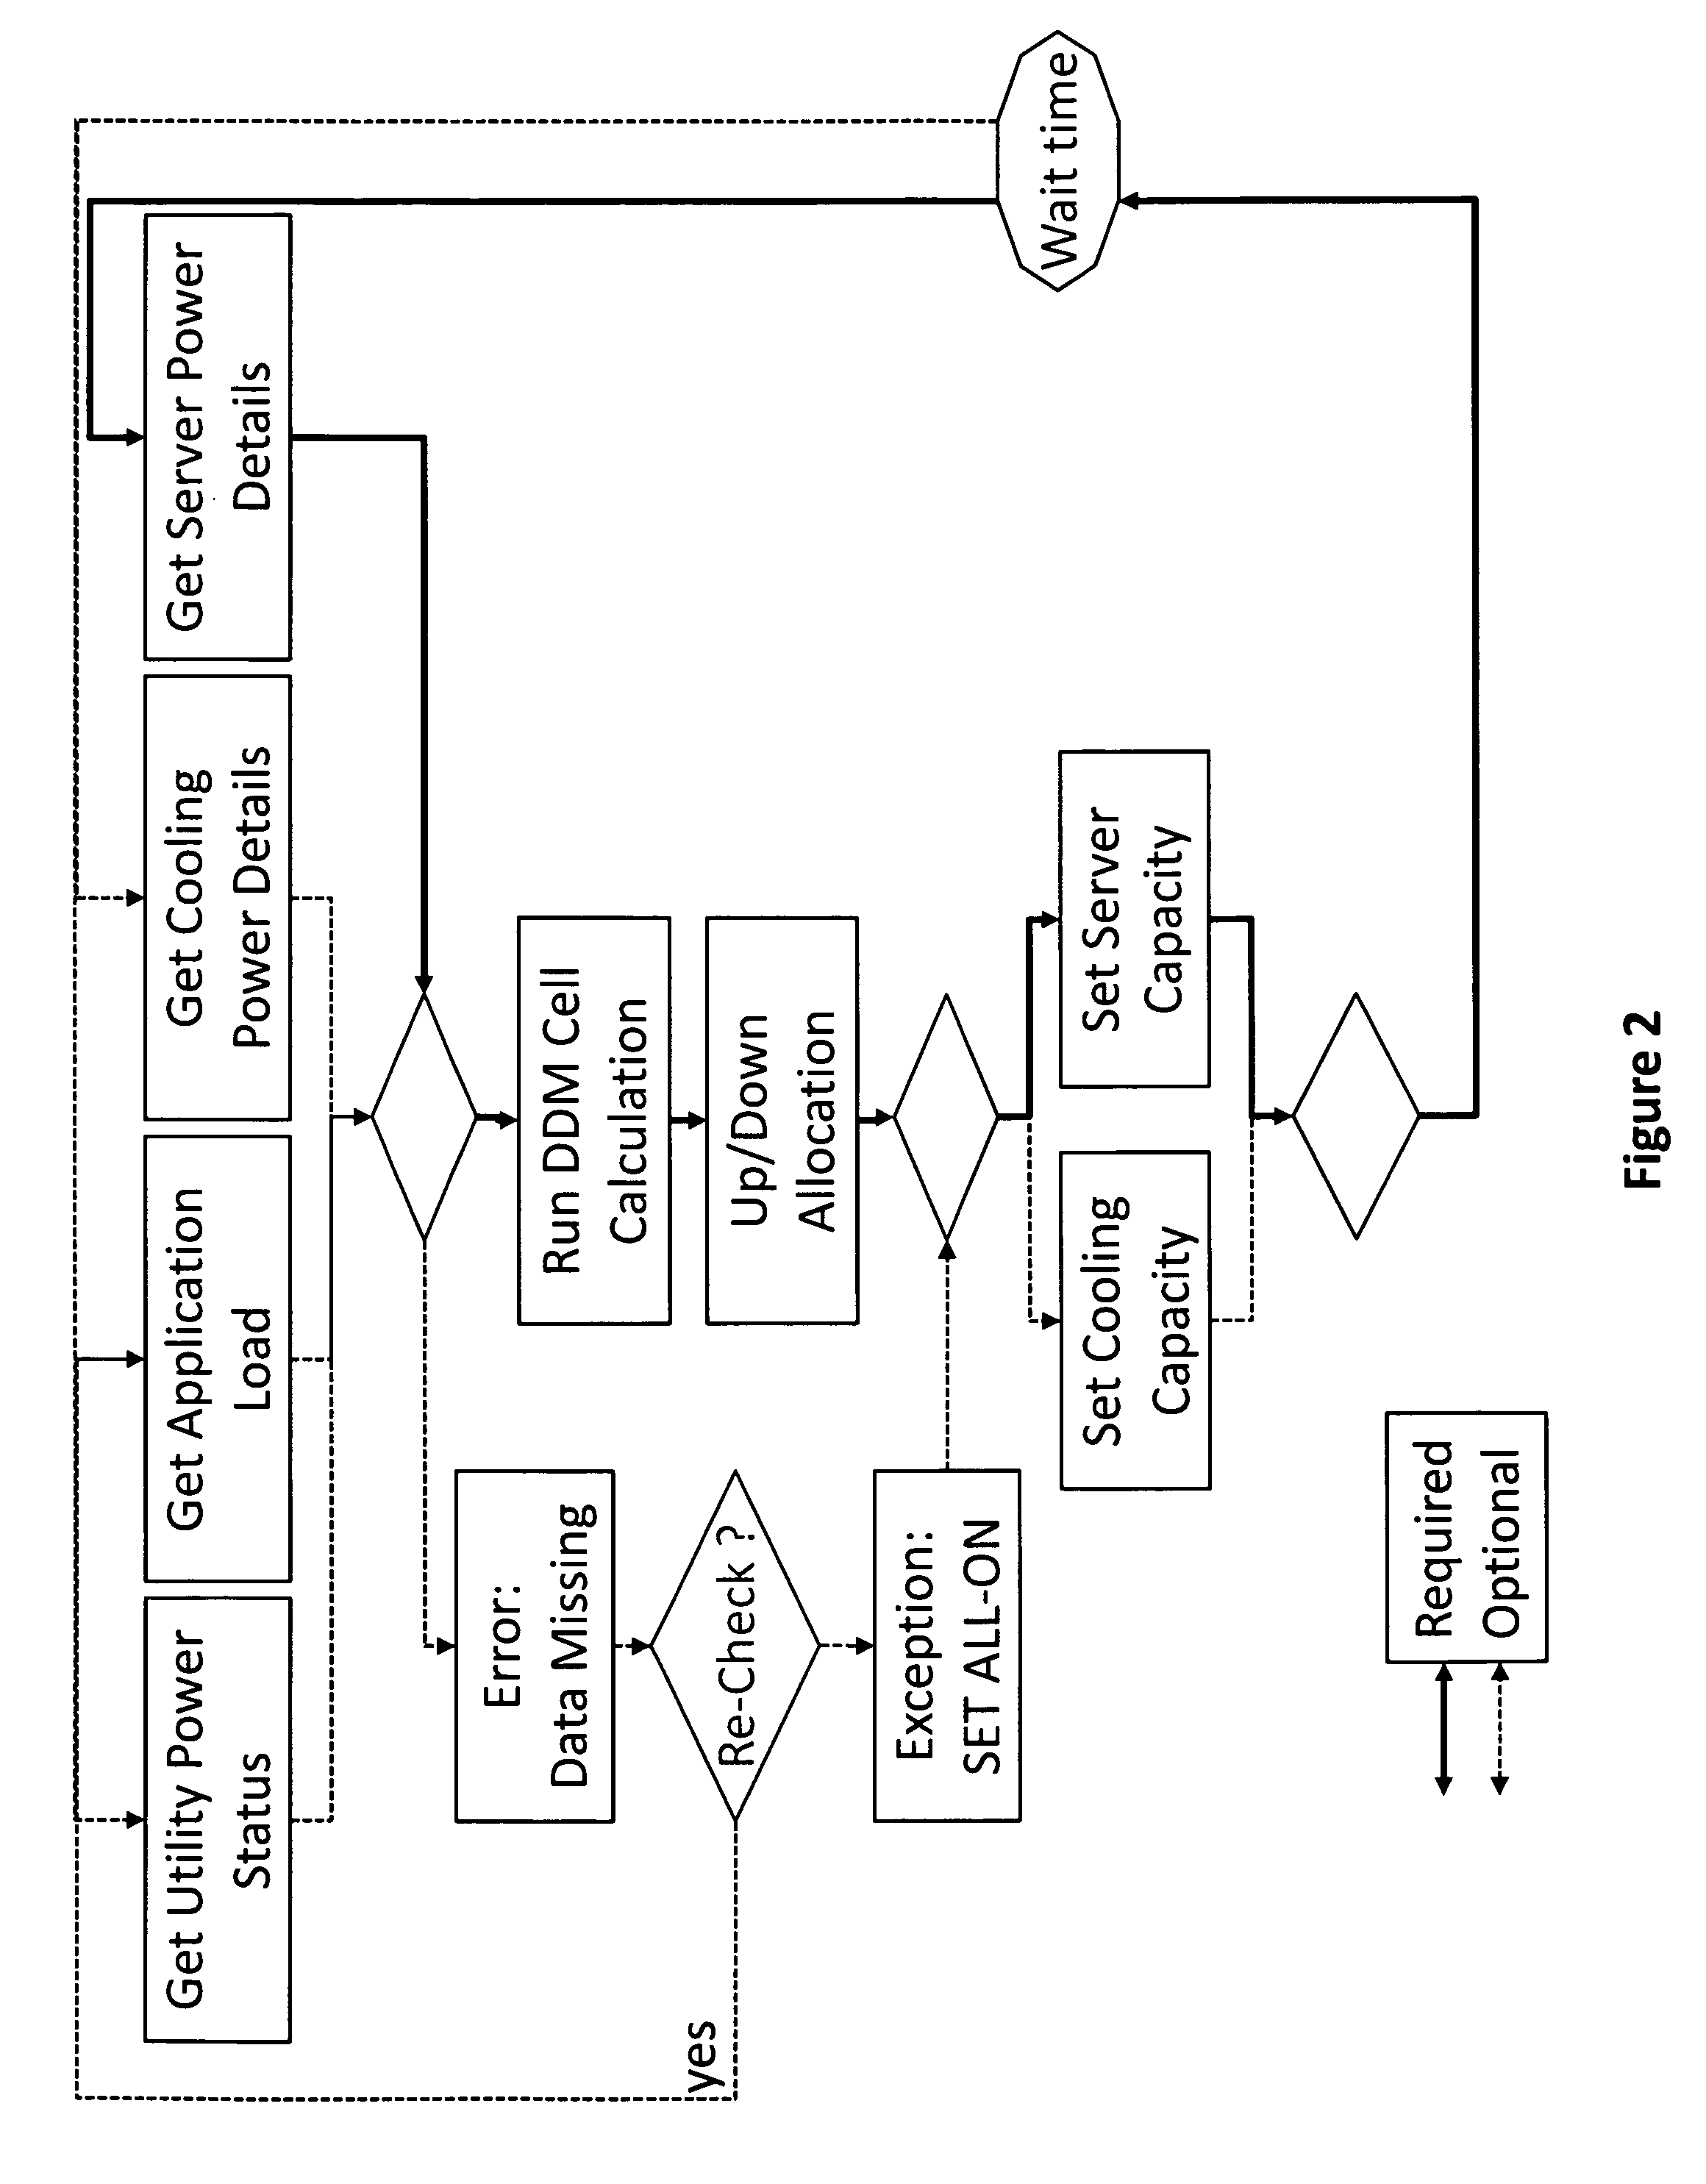 Method and apparatus for holistic power management to dynamically and automatically turn servers, network equipment and facility components on and off inside and across multiple data centers based on a variety of parameters without violating existing service levels